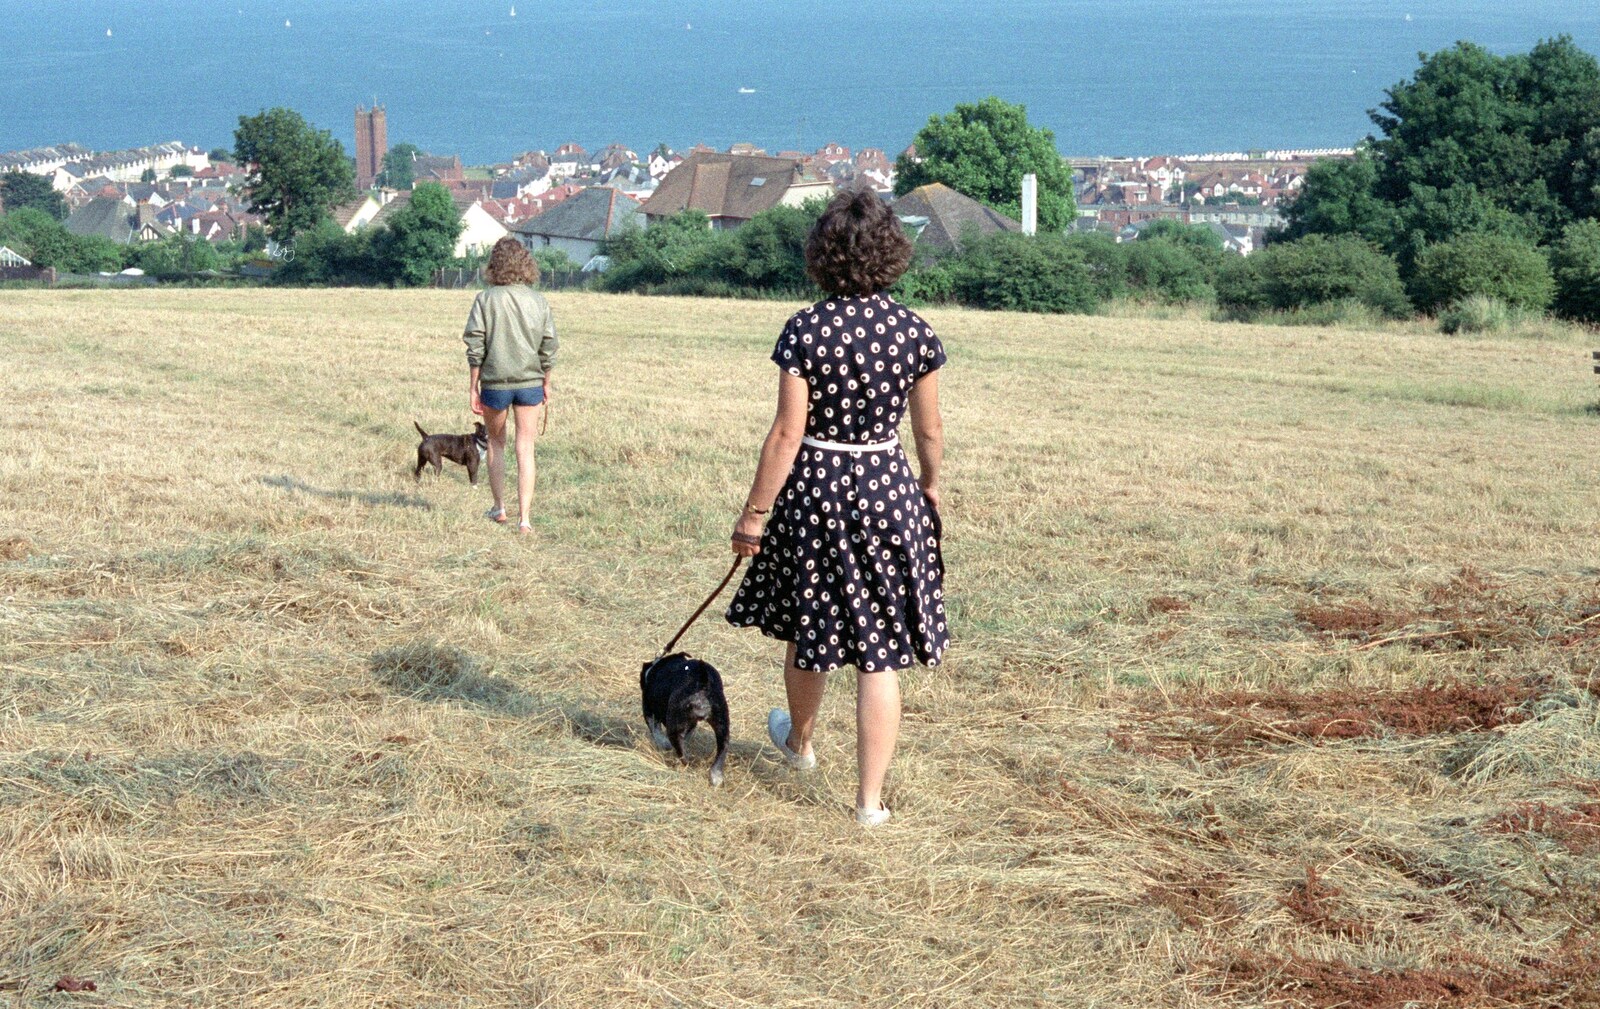 Taking the dogs for a walk from Uni: A Trip to the Riviera and Oberon Gets New Shoes, Torquay and Harbertonford, Devon - 3rd July 1989